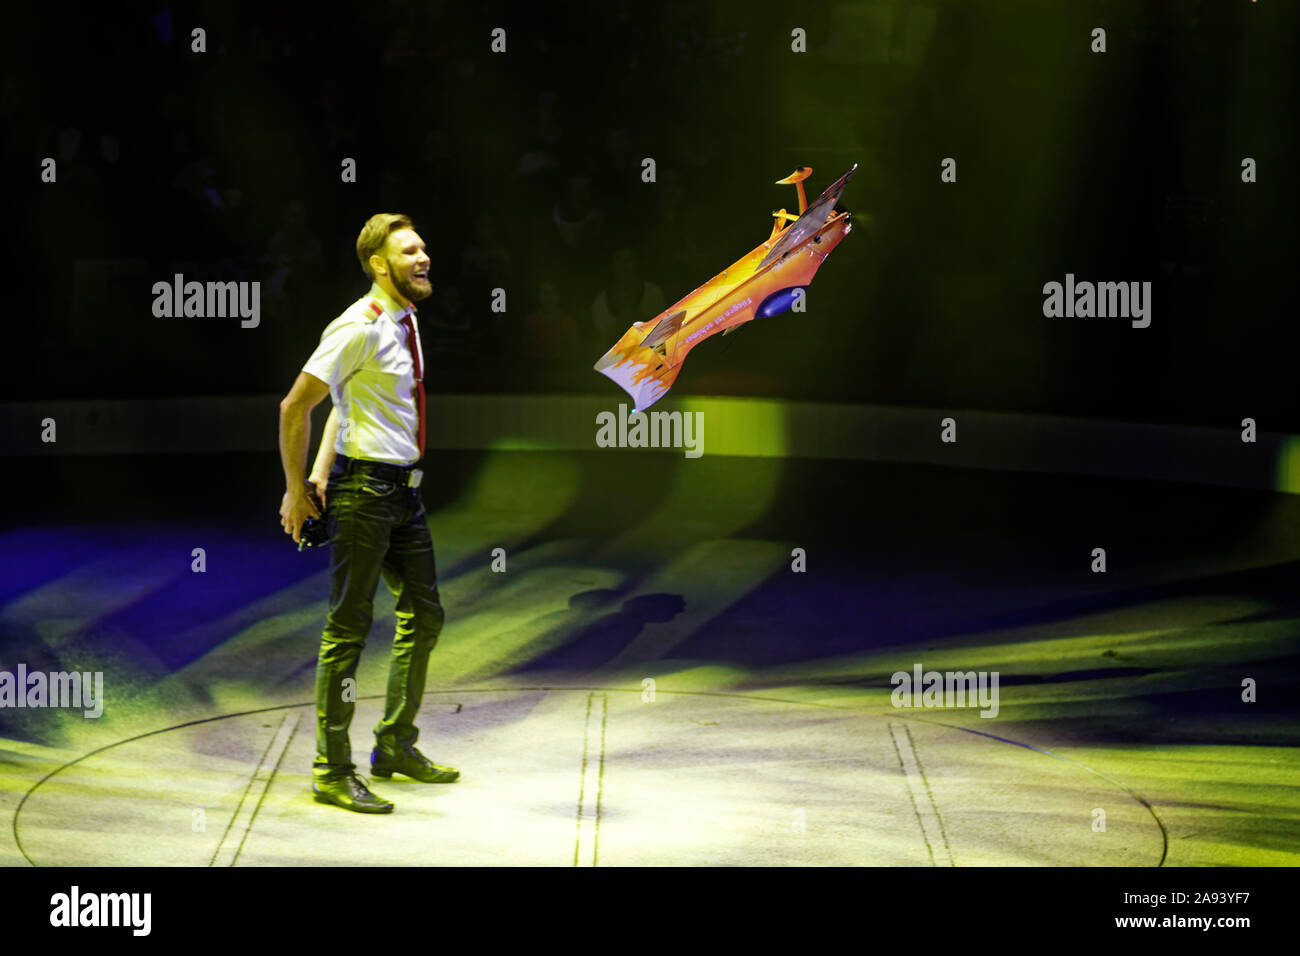 Paris, France. 9th Nov, 2019. Daniel Golla and his airplane perform during the show 'Défi' of Cirque Bouglione at the Cirque d'Hiver in Paris. Stock Photo